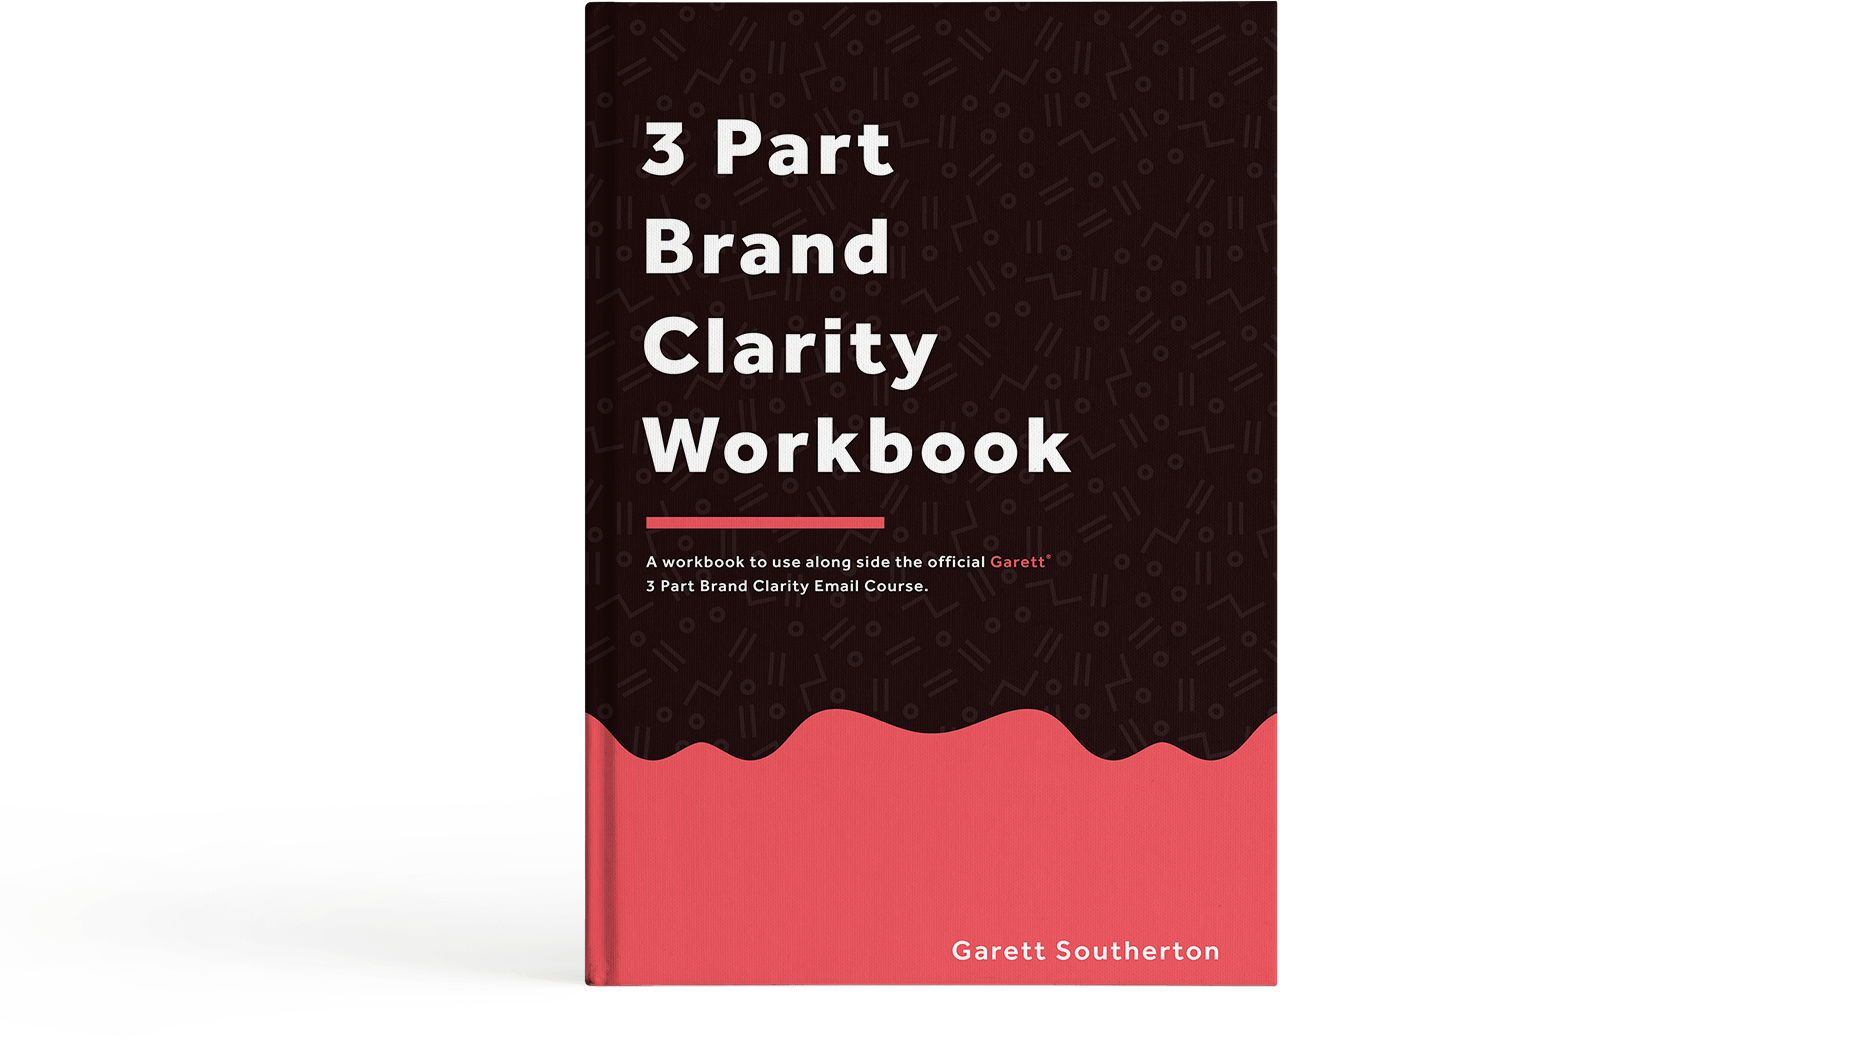 3 Part Brand Clarity Email Course Project by Garett Southerton of Garett®, Creative Brand Strategist in Long Island, NY